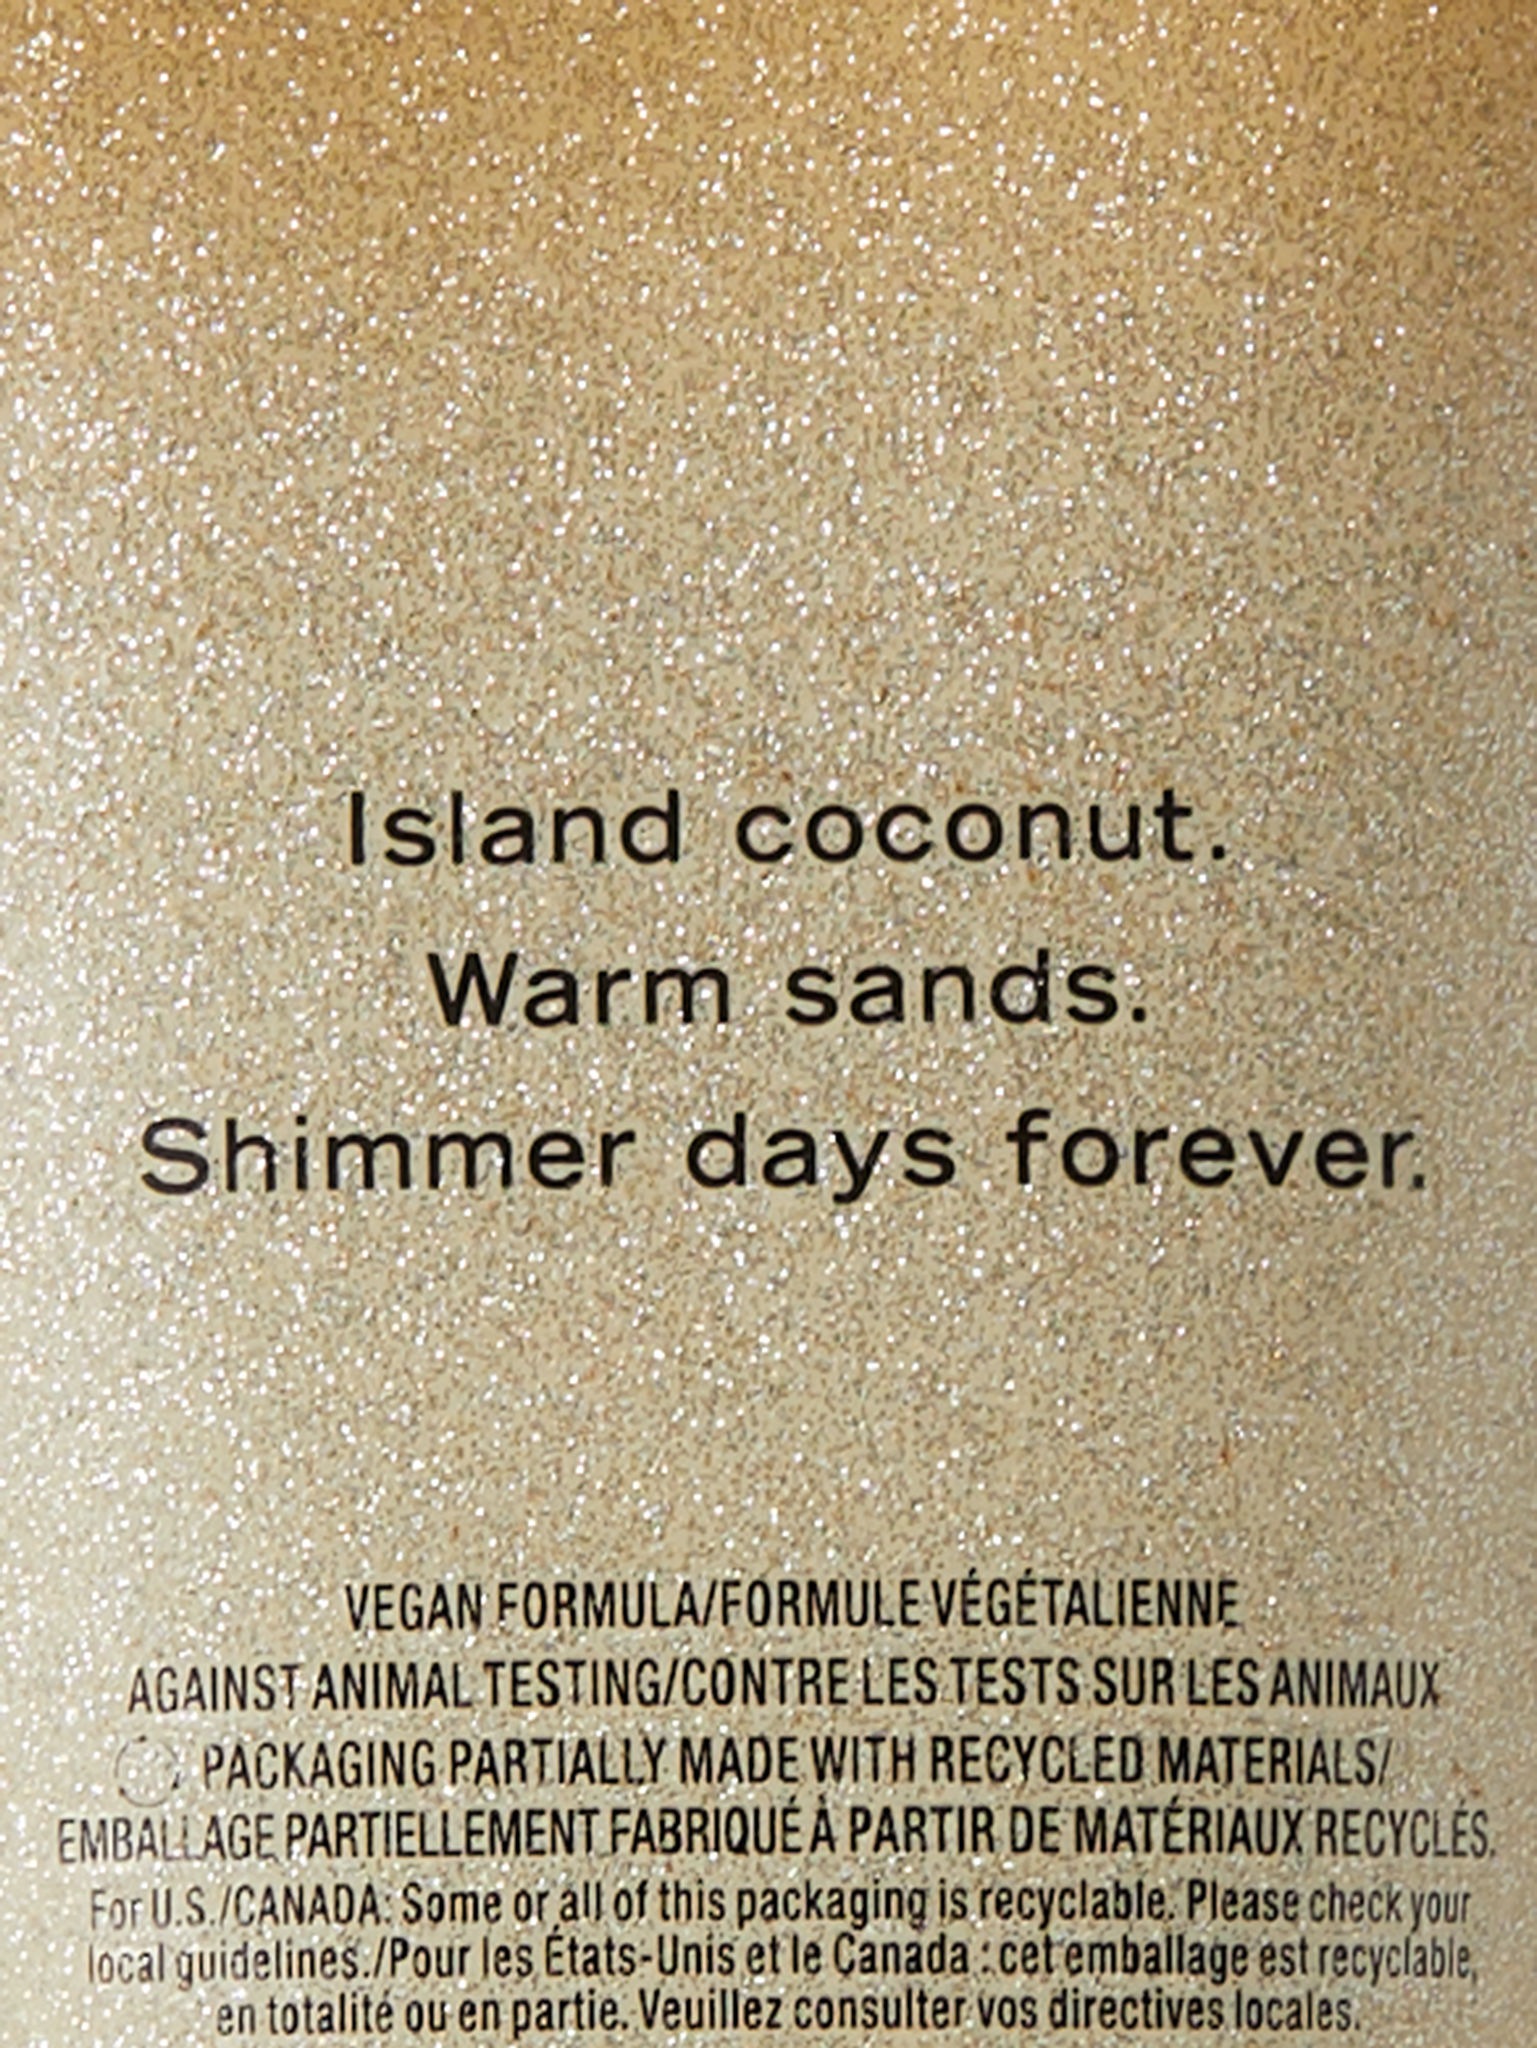 Shimmer Body Lotion image number null